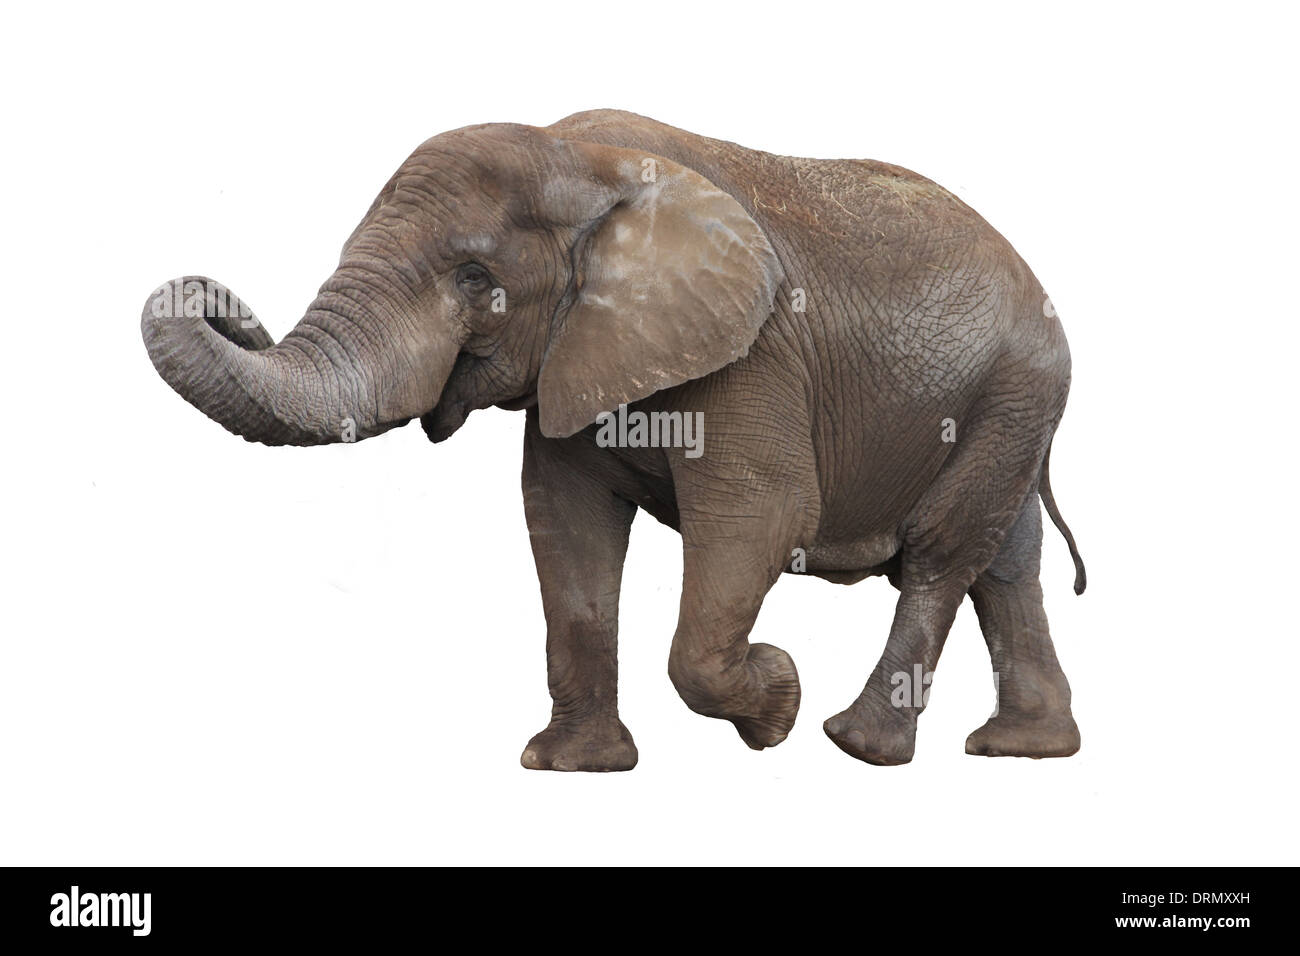 Elephant isolated on white Banque D'Images